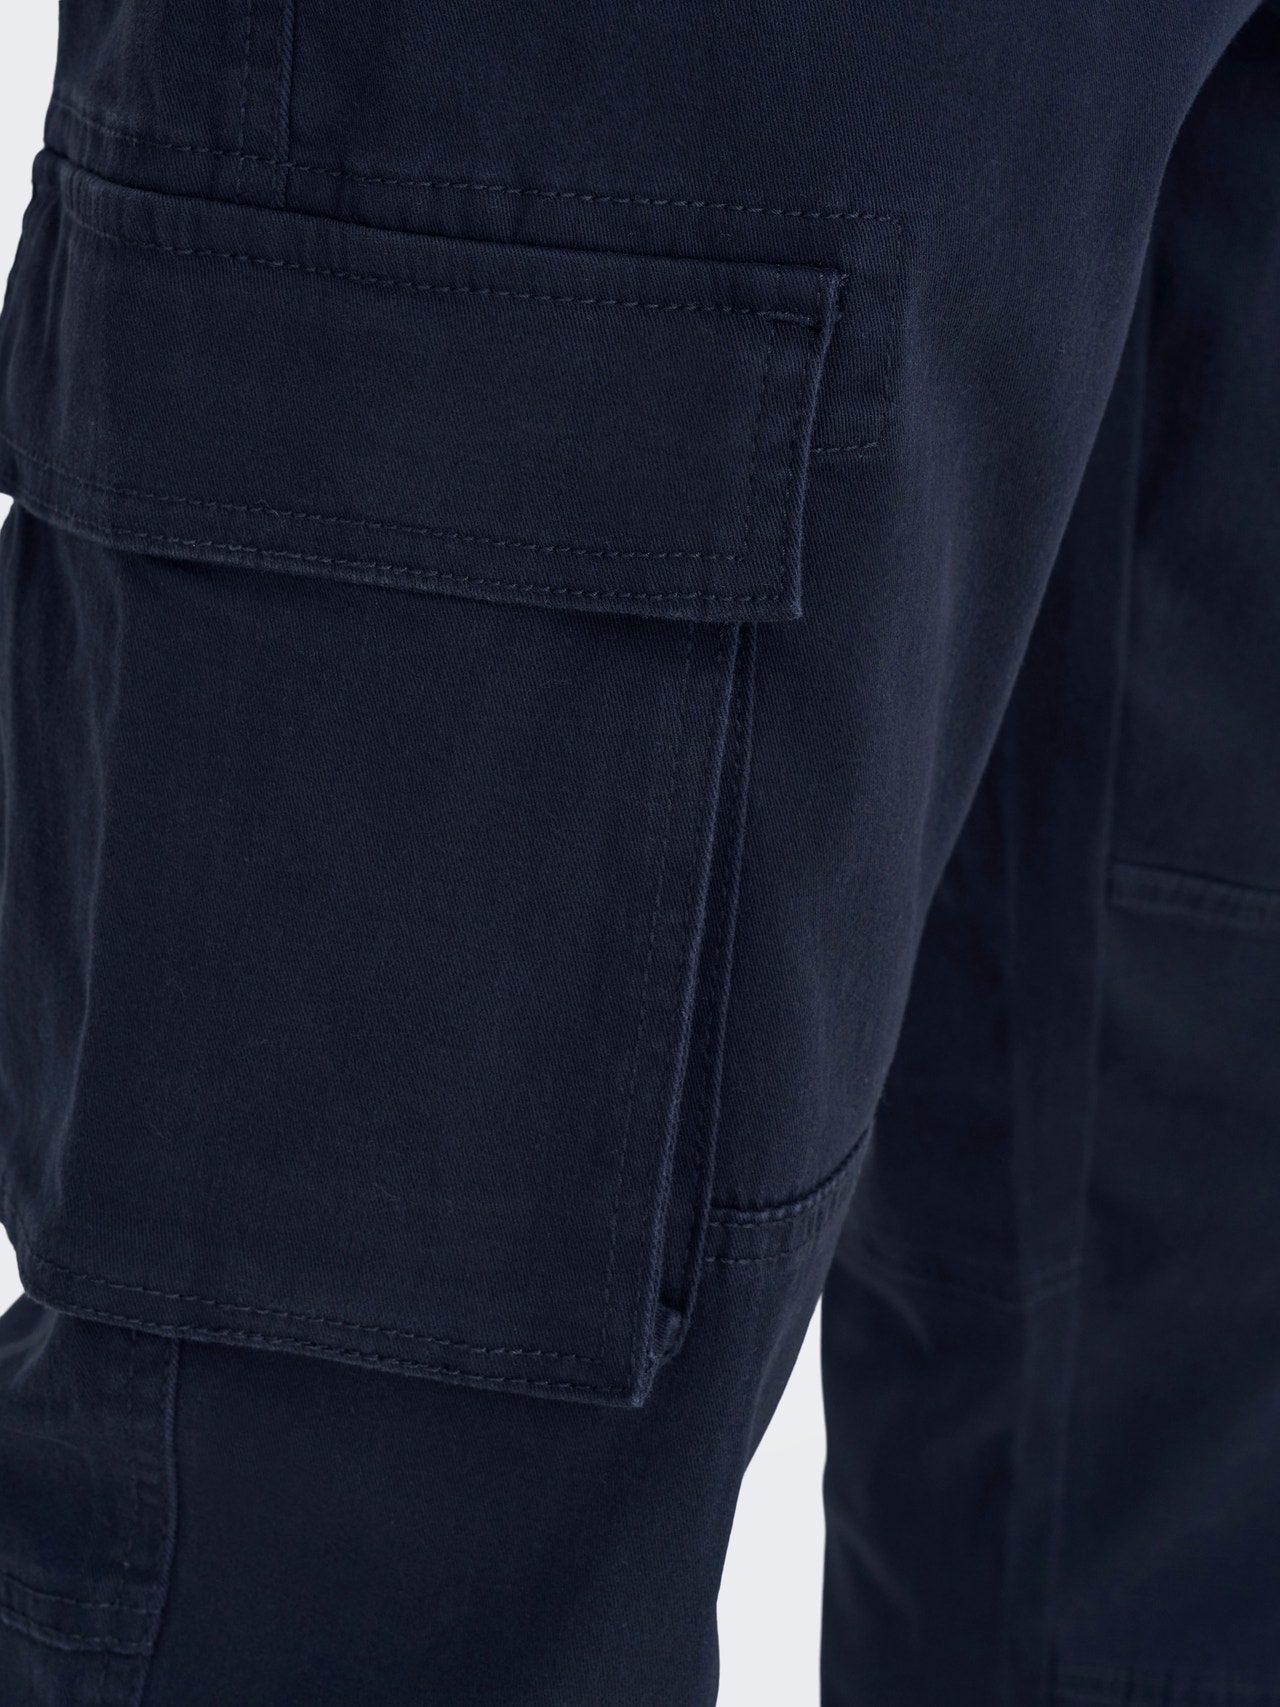 ONLY & SONS Cargo trousers -Dark Navy - 22016687